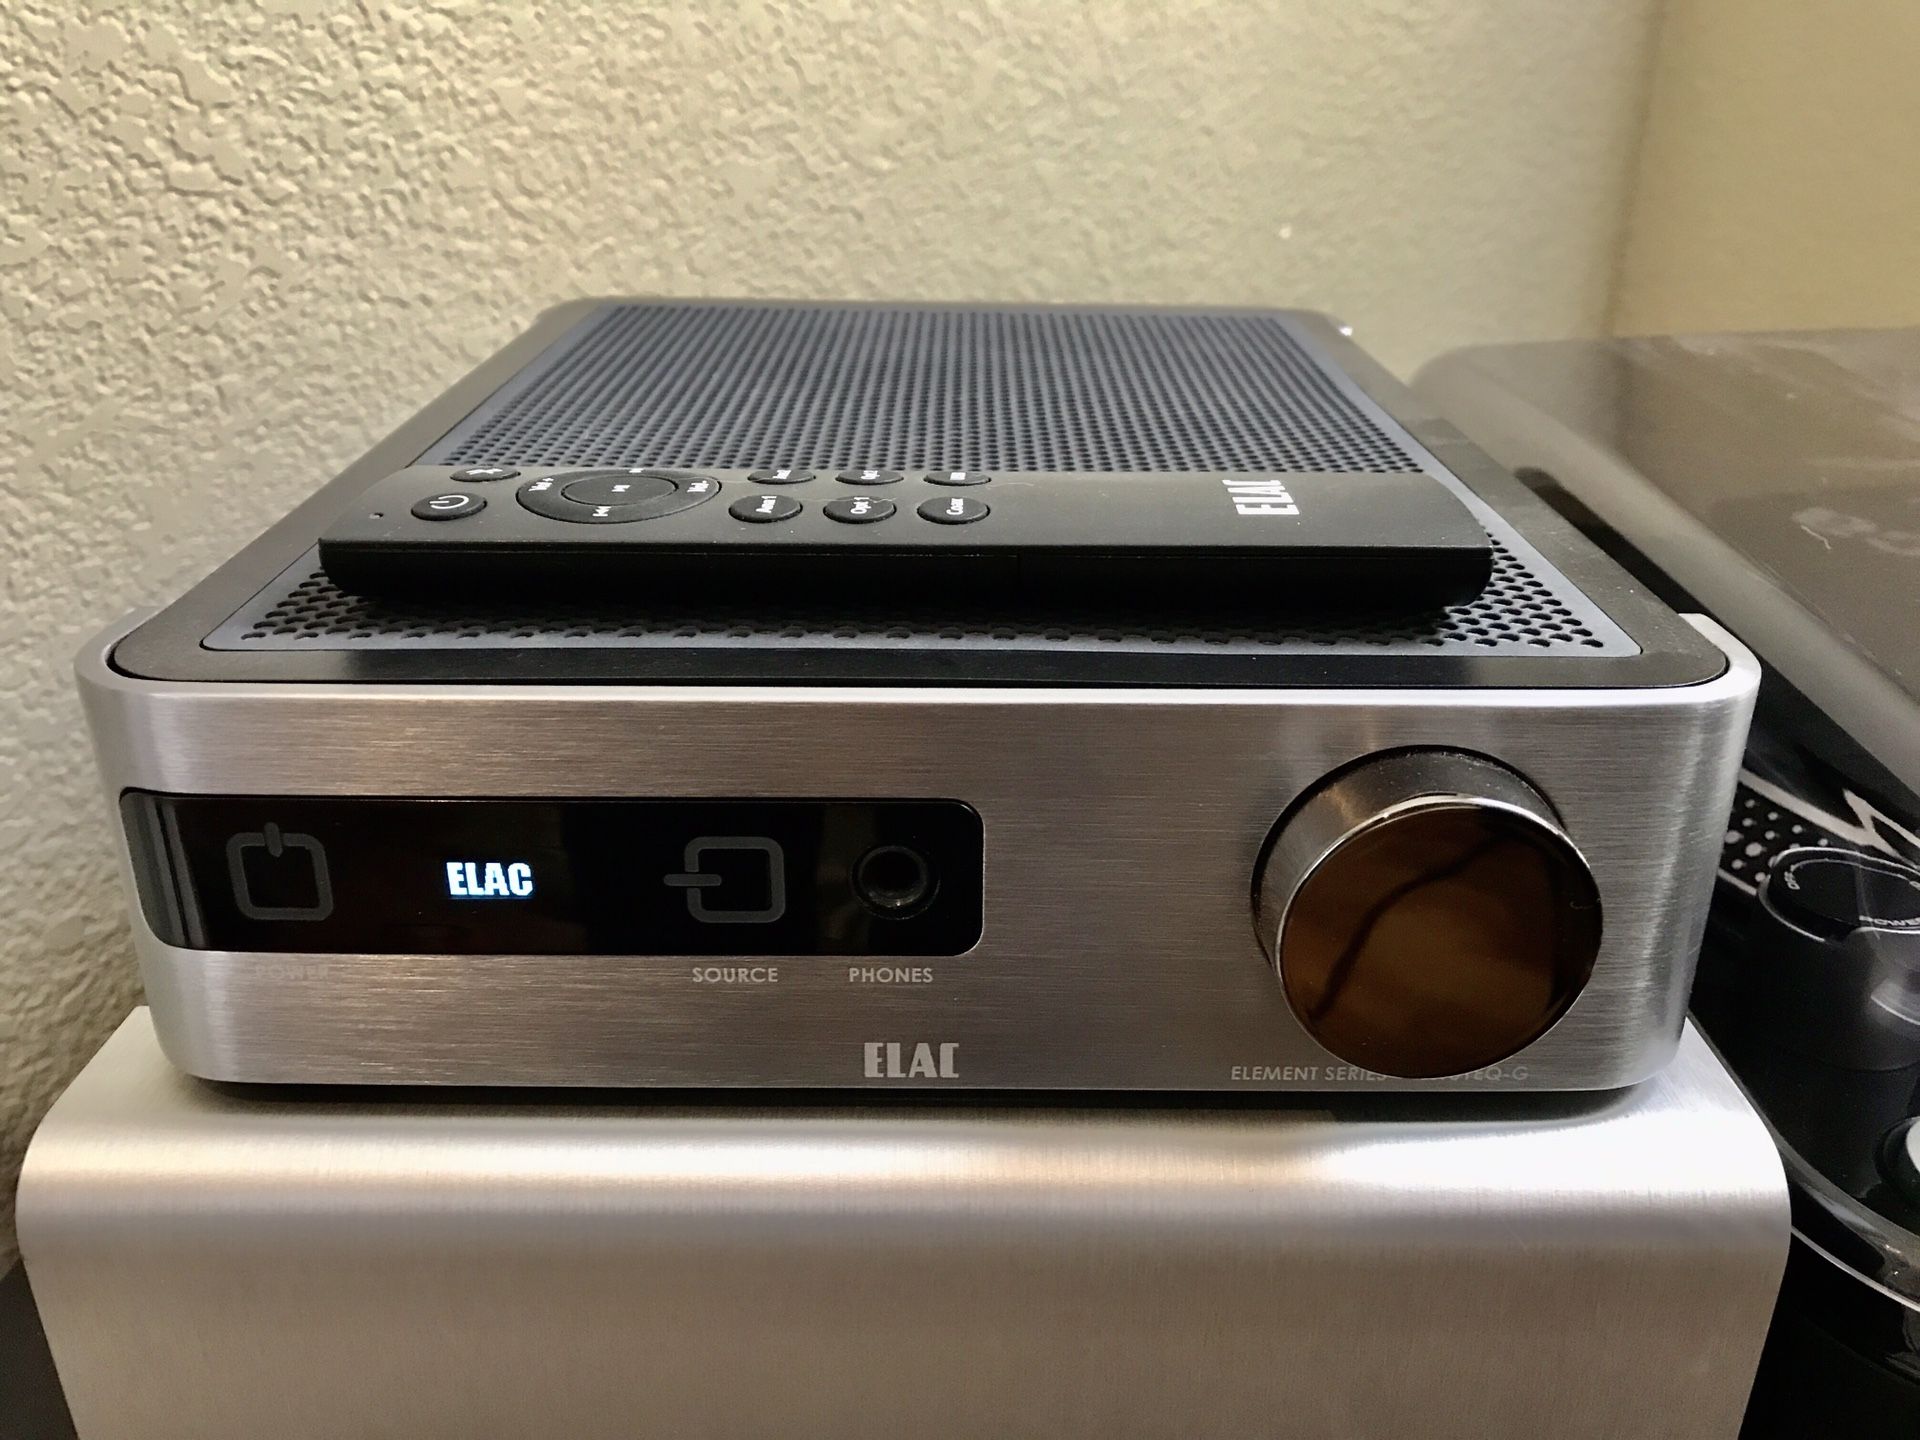 Elac Integrated Amplifier, 7 Analog and Digital Inputs